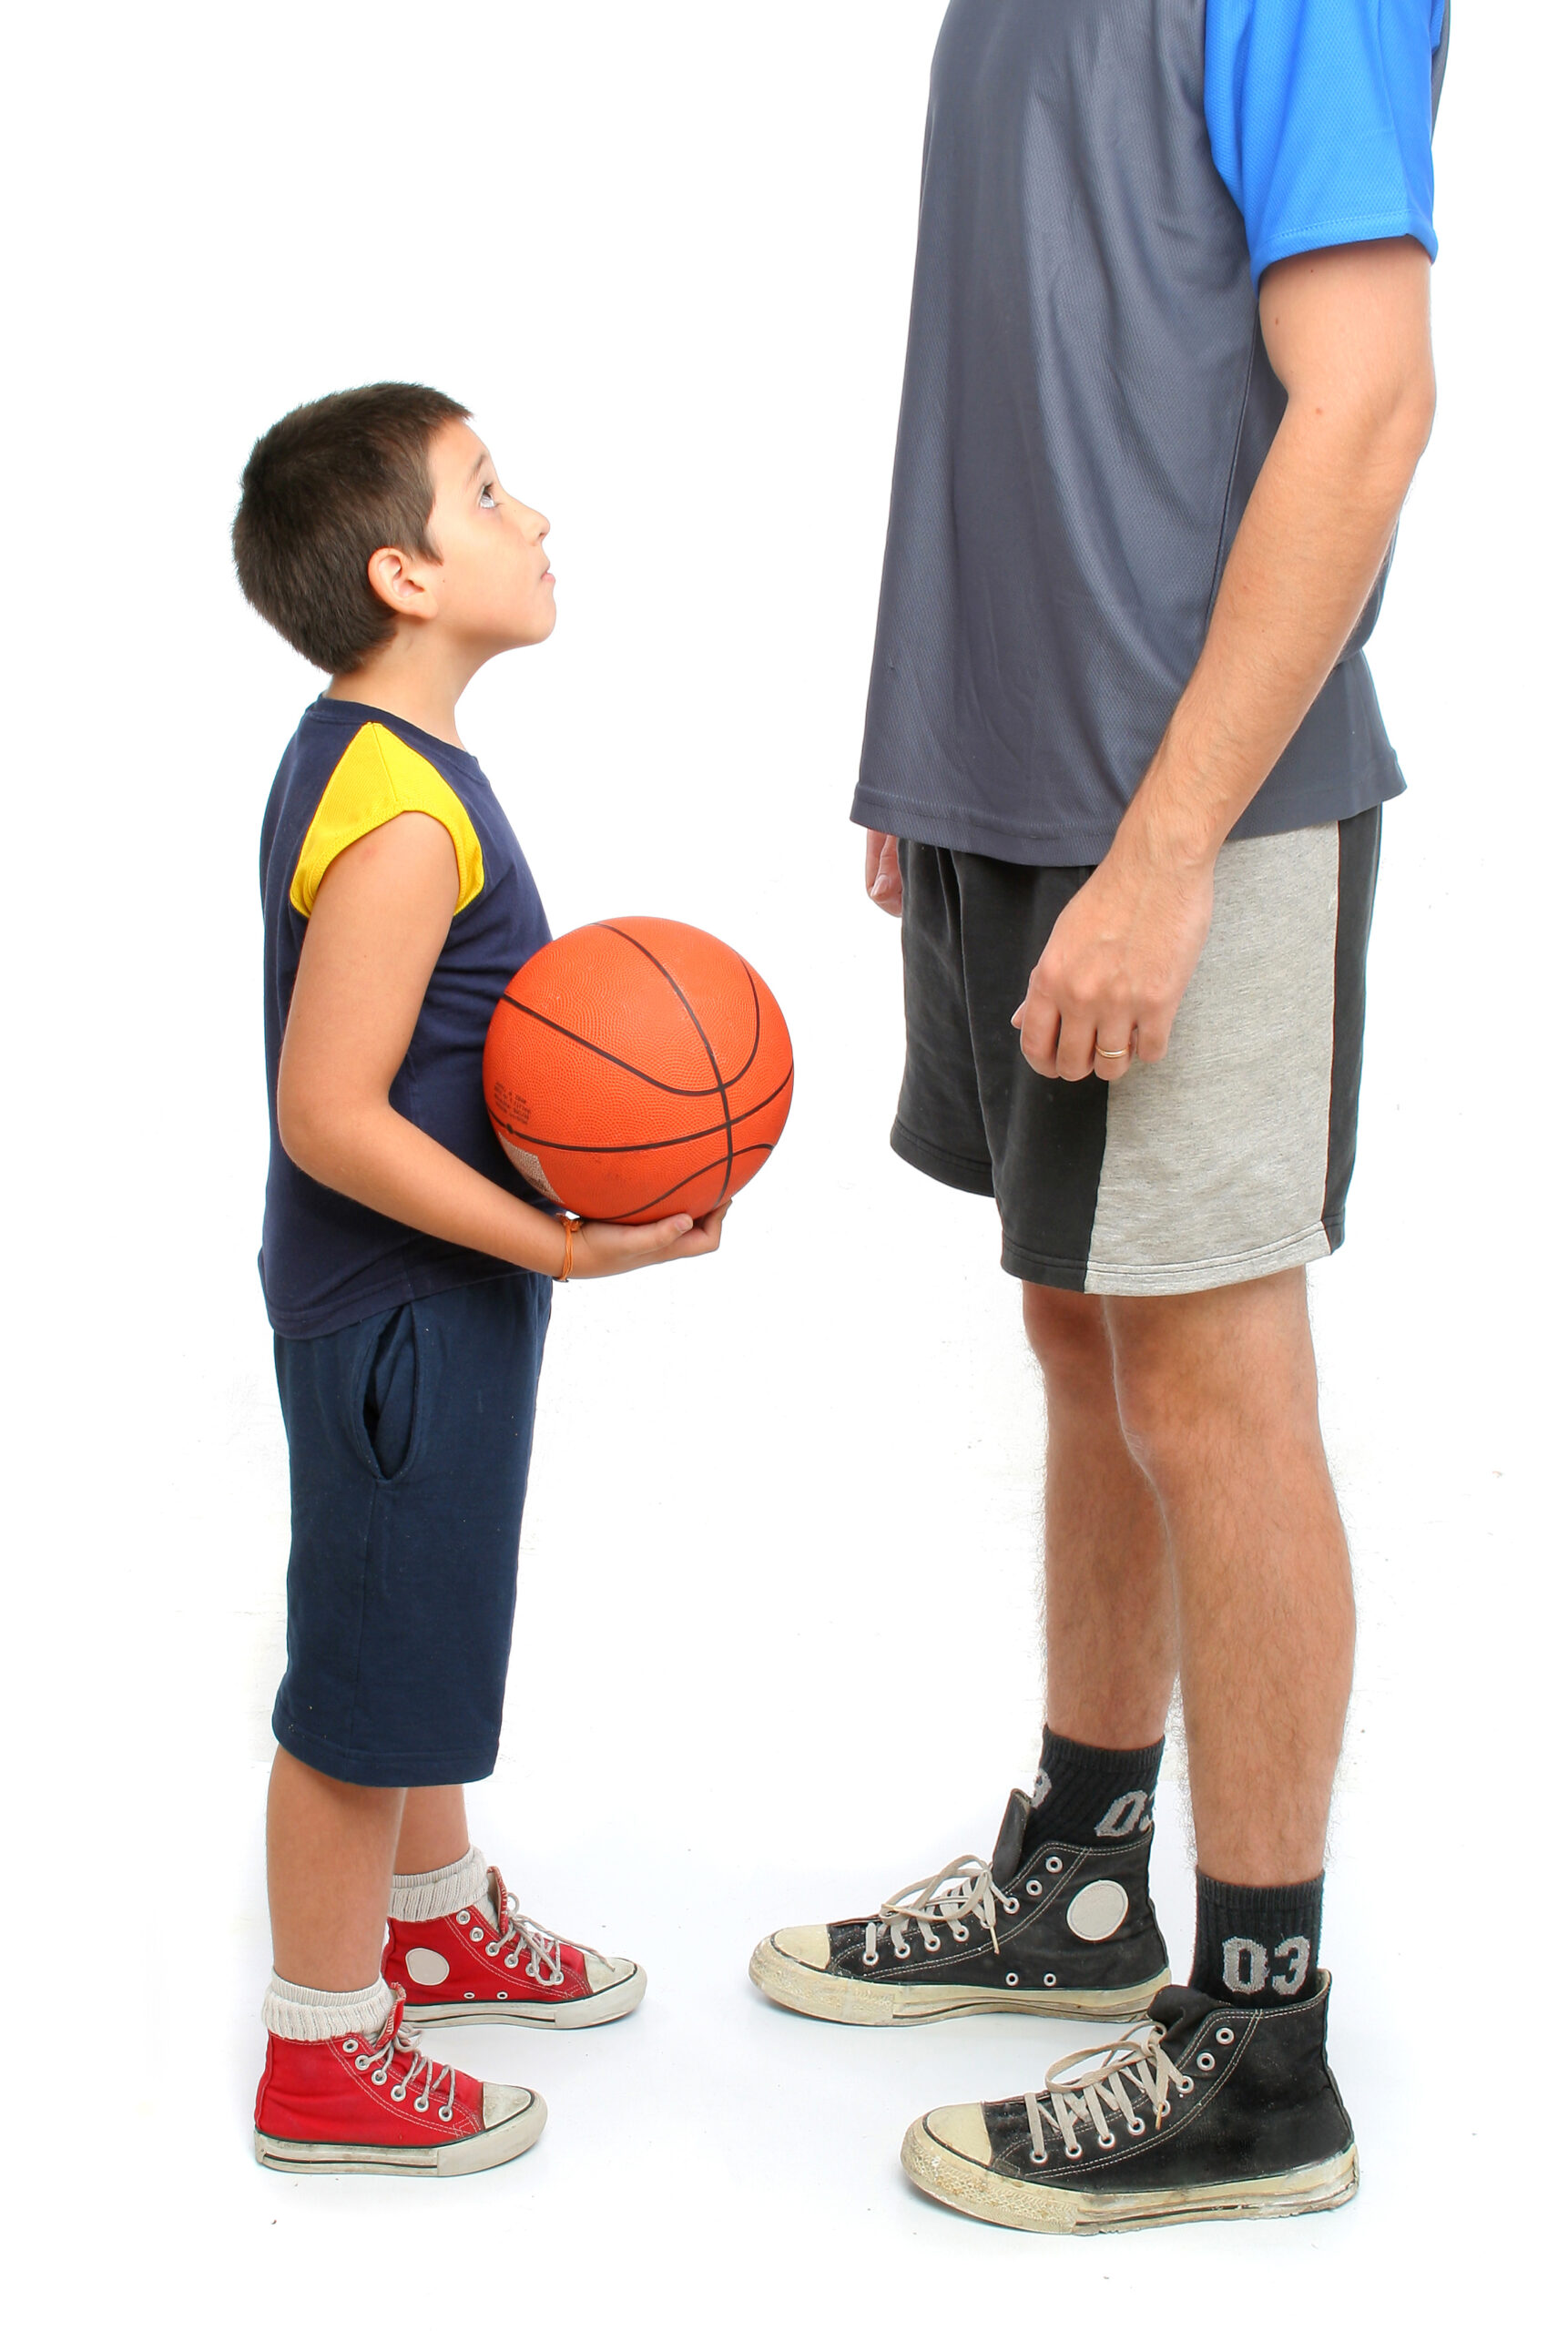 Help, My Child is a Late Bloomer: 5 Tips for Overcoming the “Relative Age Effect” in Youth Sports